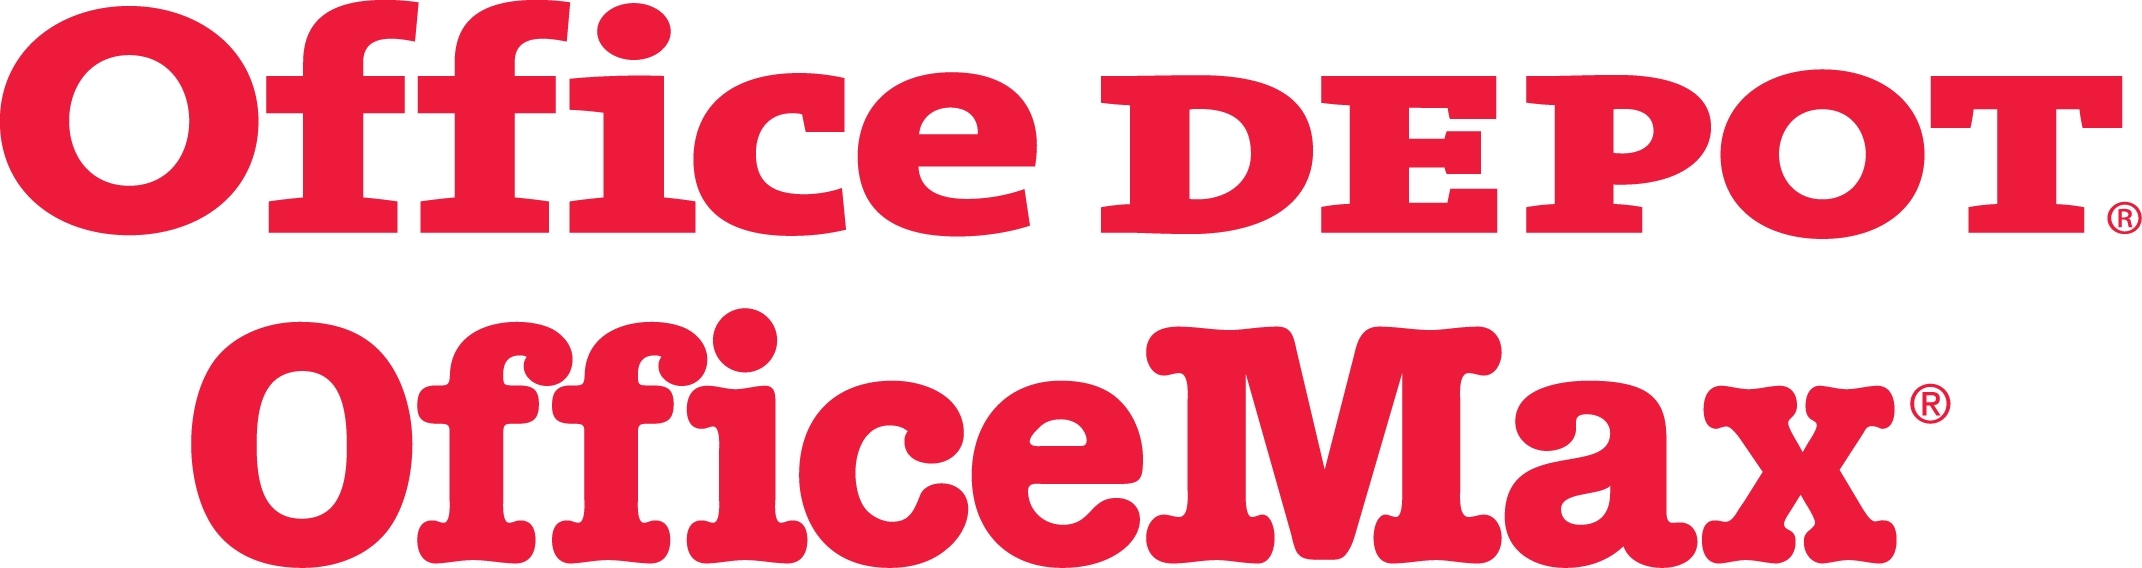 Success Is in Session for Students, Parents and Teachers at Office Depot |  Business Wire